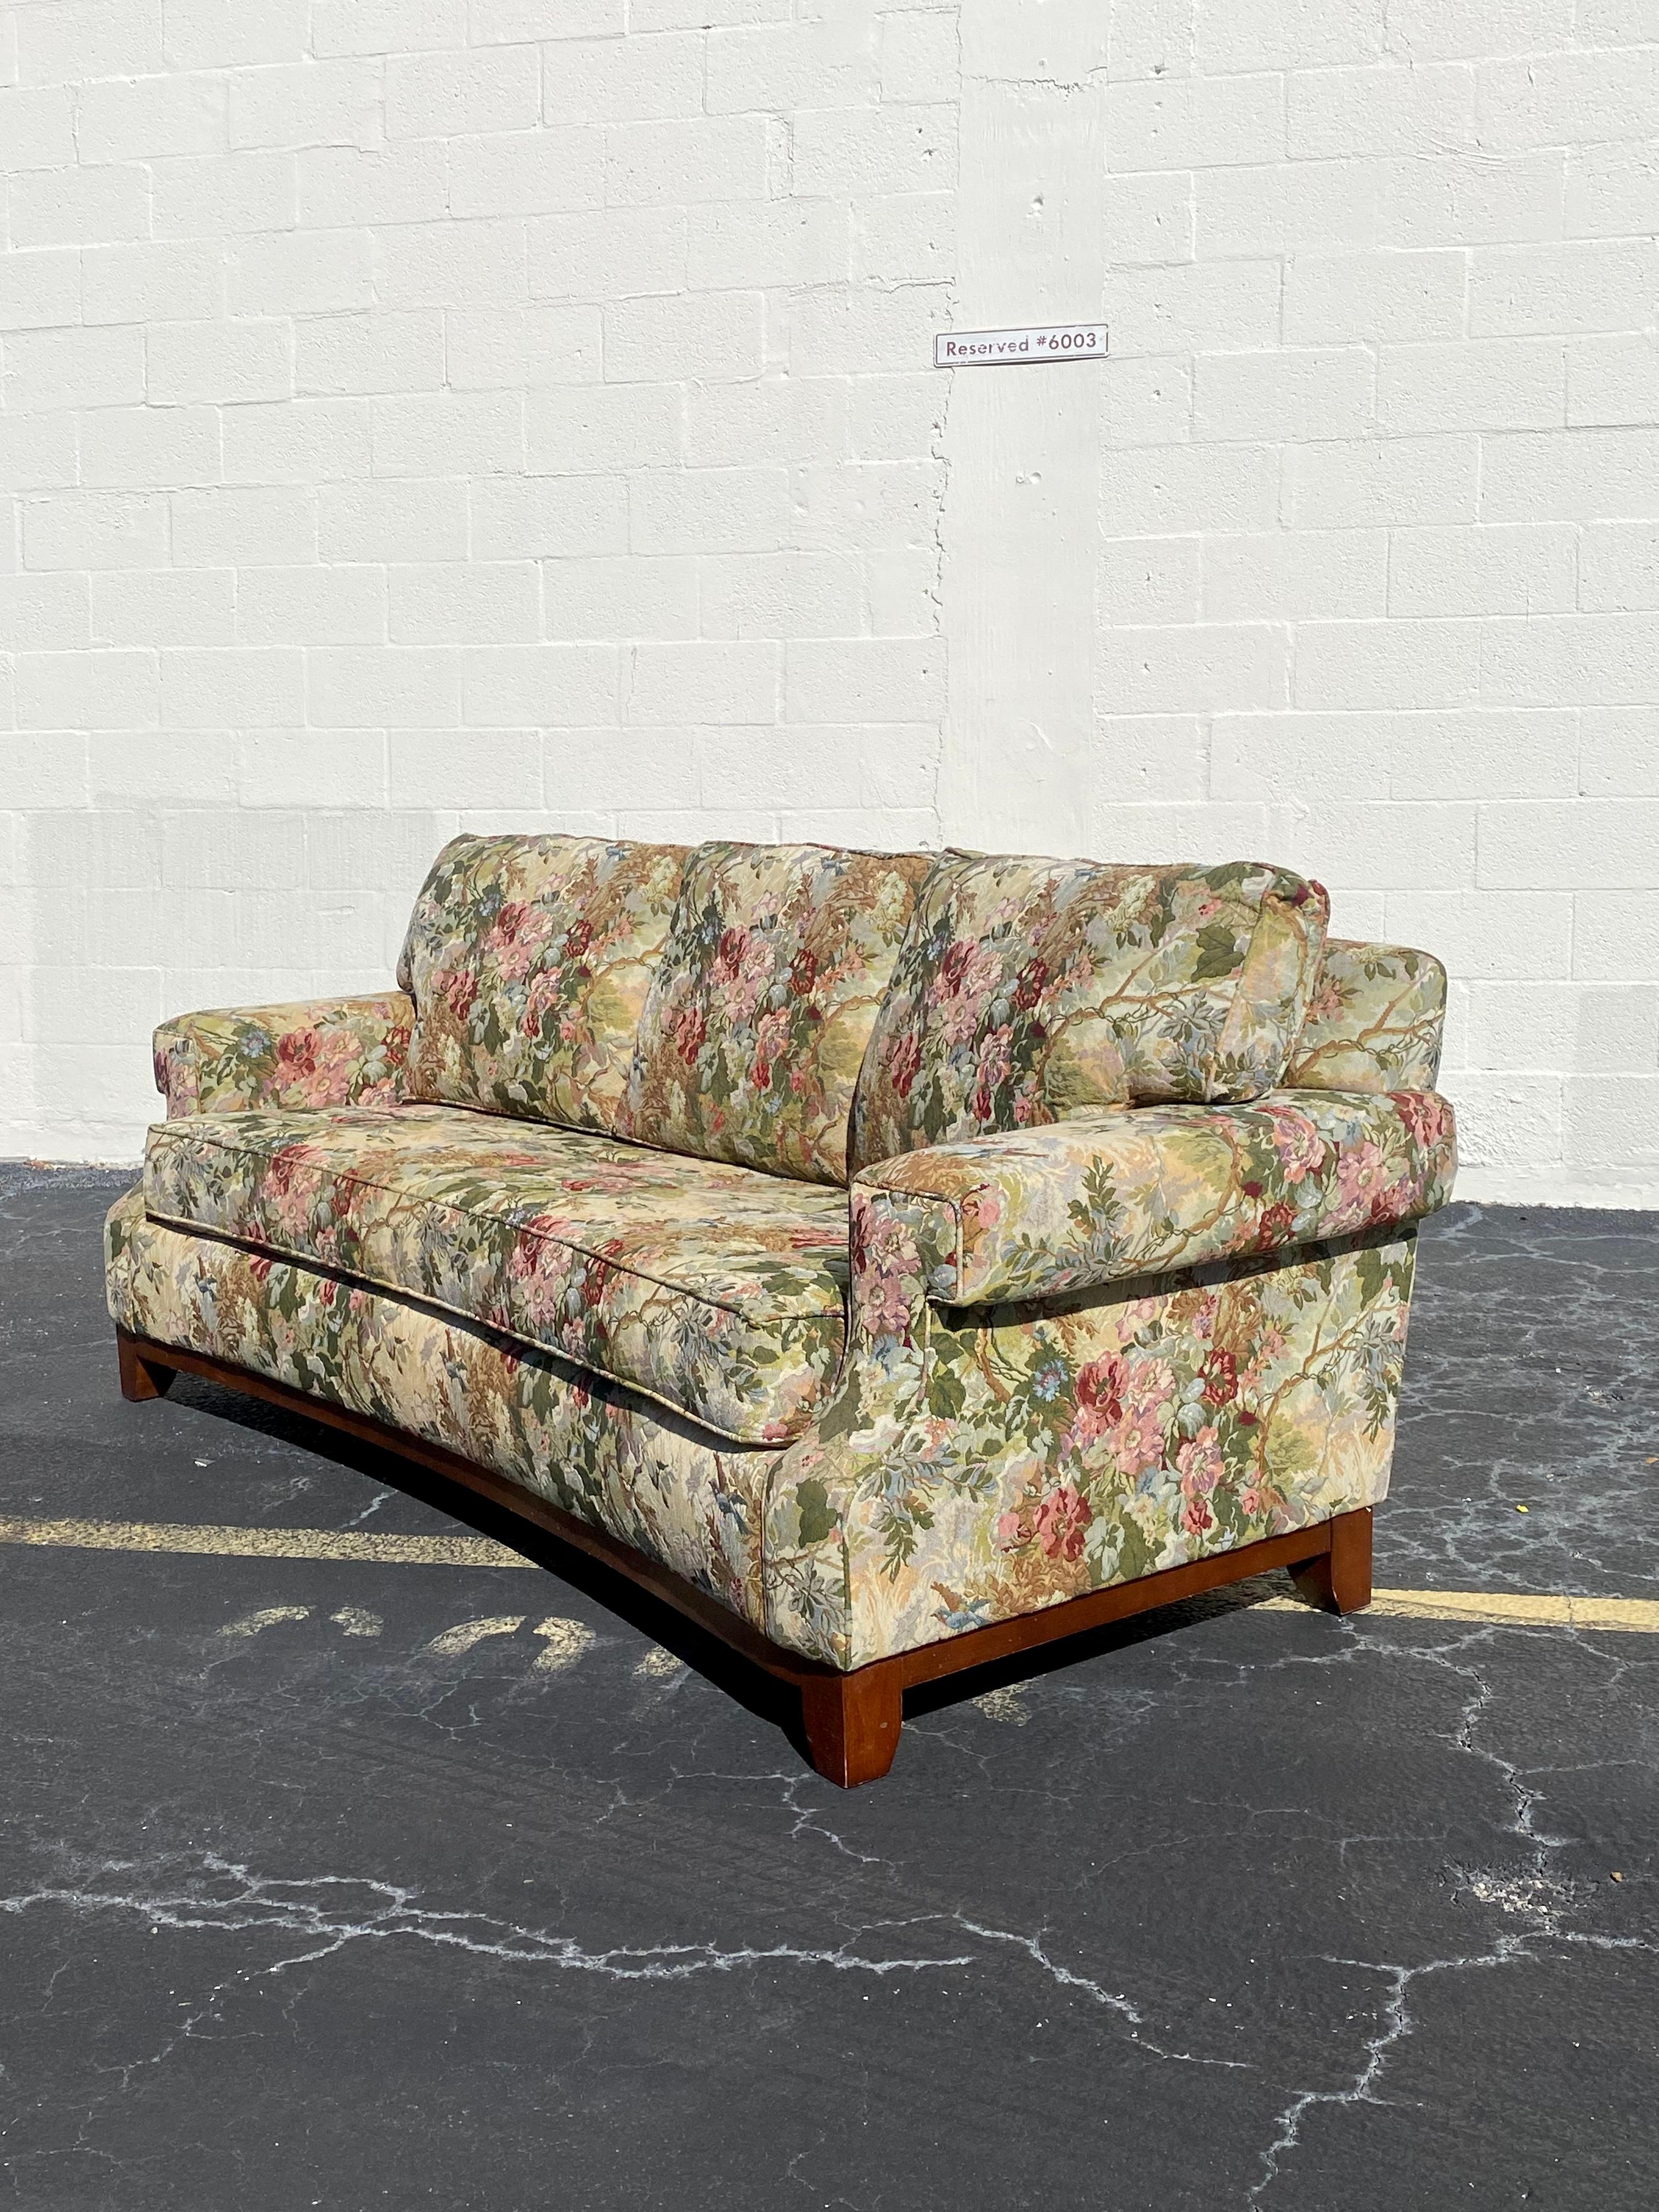 Thomasville Curved Chinoiserie Chintz Floral Textile Down Sofa In Excellent Condition For Sale In Fort Lauderdale, FL